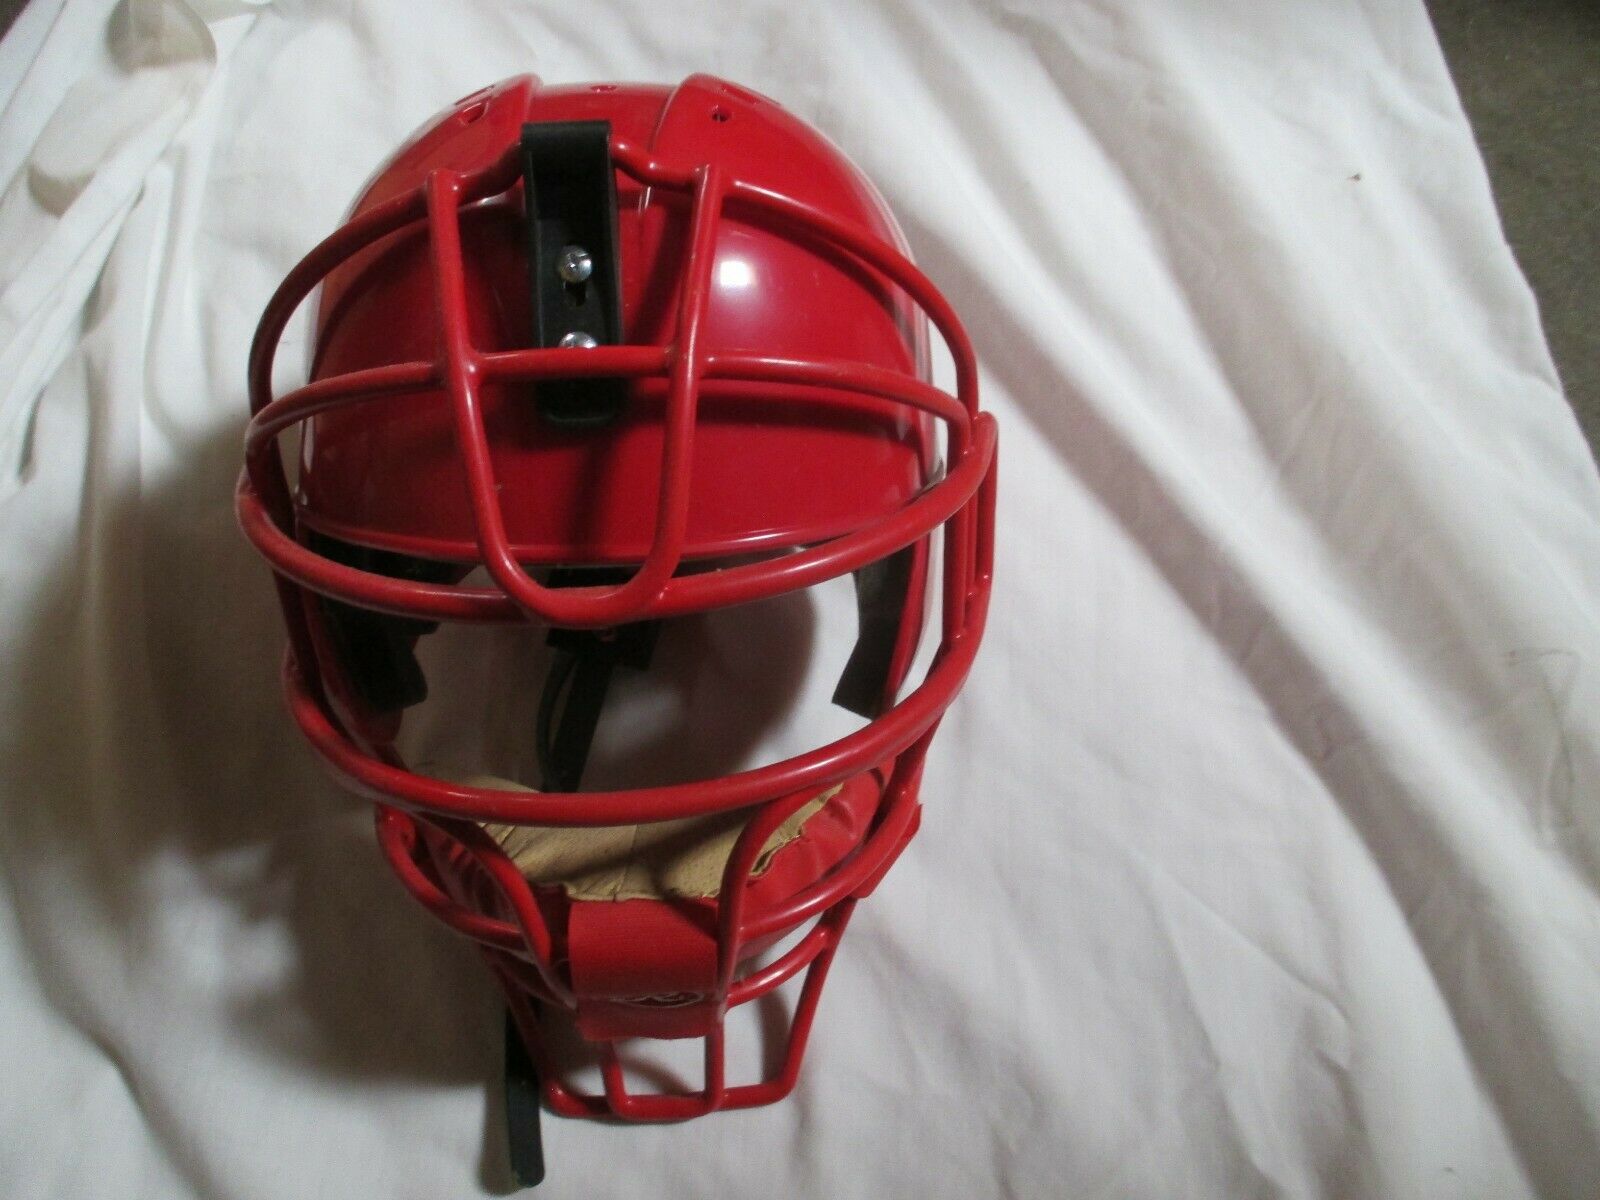 RAWLINGS Ai1 CATCHERS HELMET WITH ATTACHED FACE MASK.(VARIOUS COLORS & SIZES)